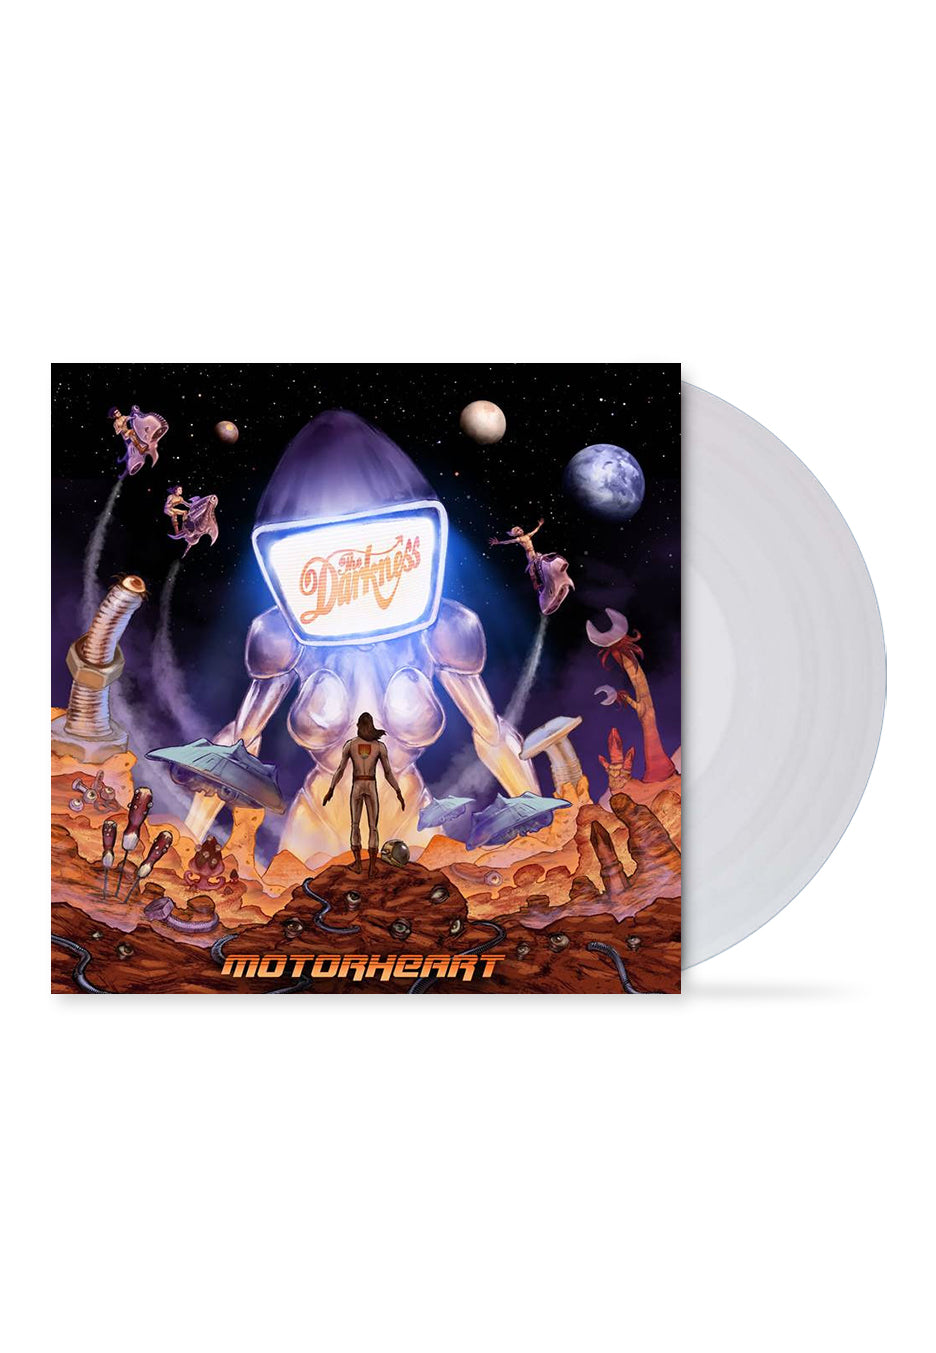 The Darkness - Motorheart Clear - Colored Vinyl